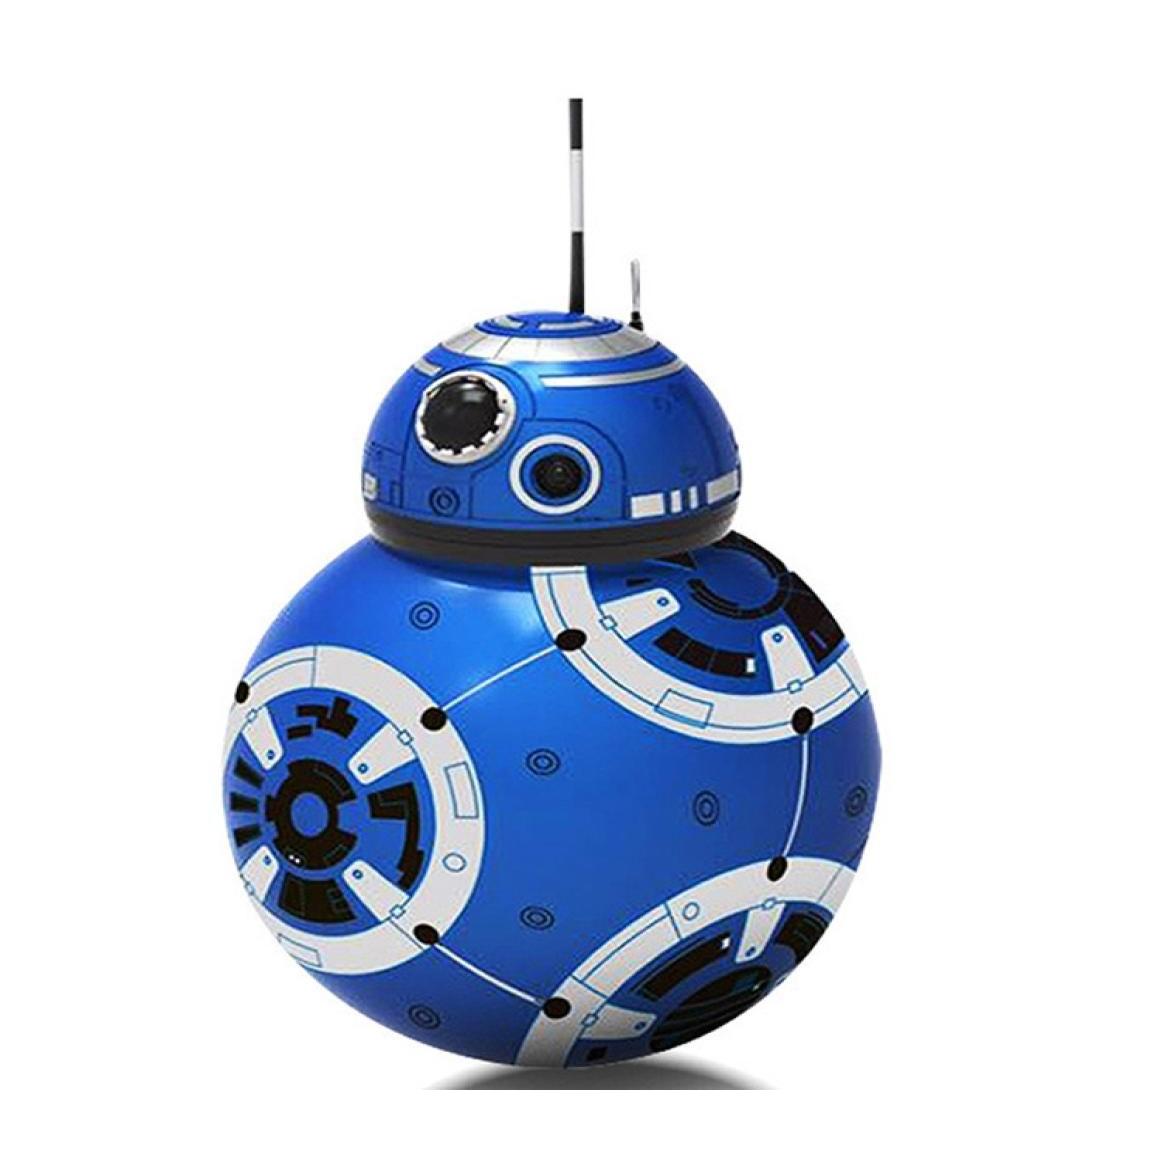 Electric/RC Animals RC BB8 Droid Robot Ball Intellent Action Kid Toy Gift Sound 24G Direte Control8255567 Drop Delivery Toys Dhsql